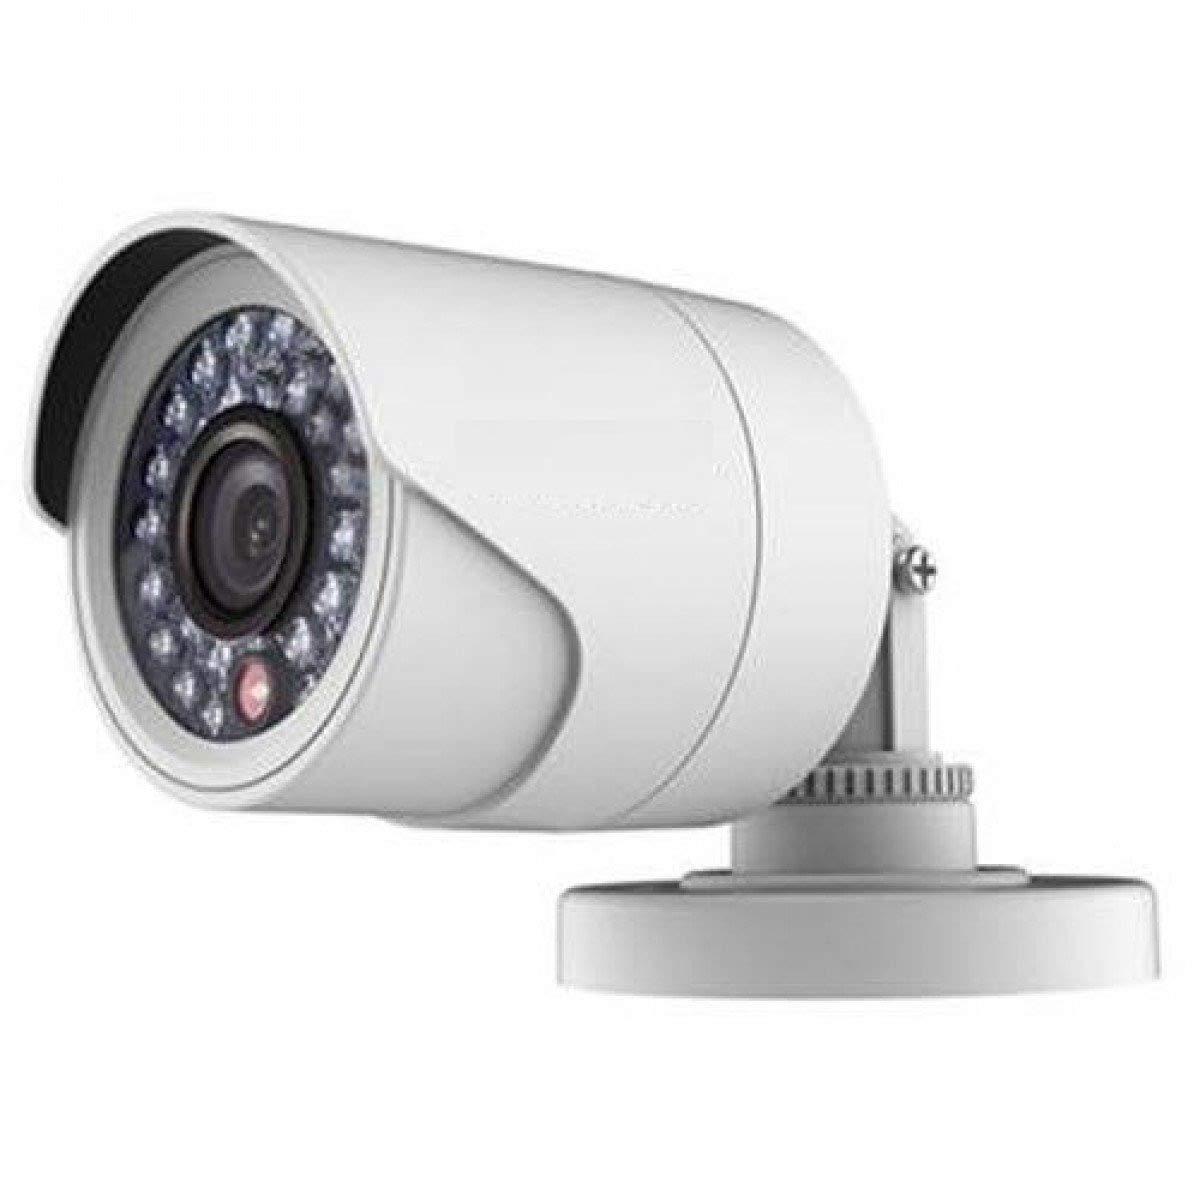 Top 15 Live Stream Cameras You Need to Know